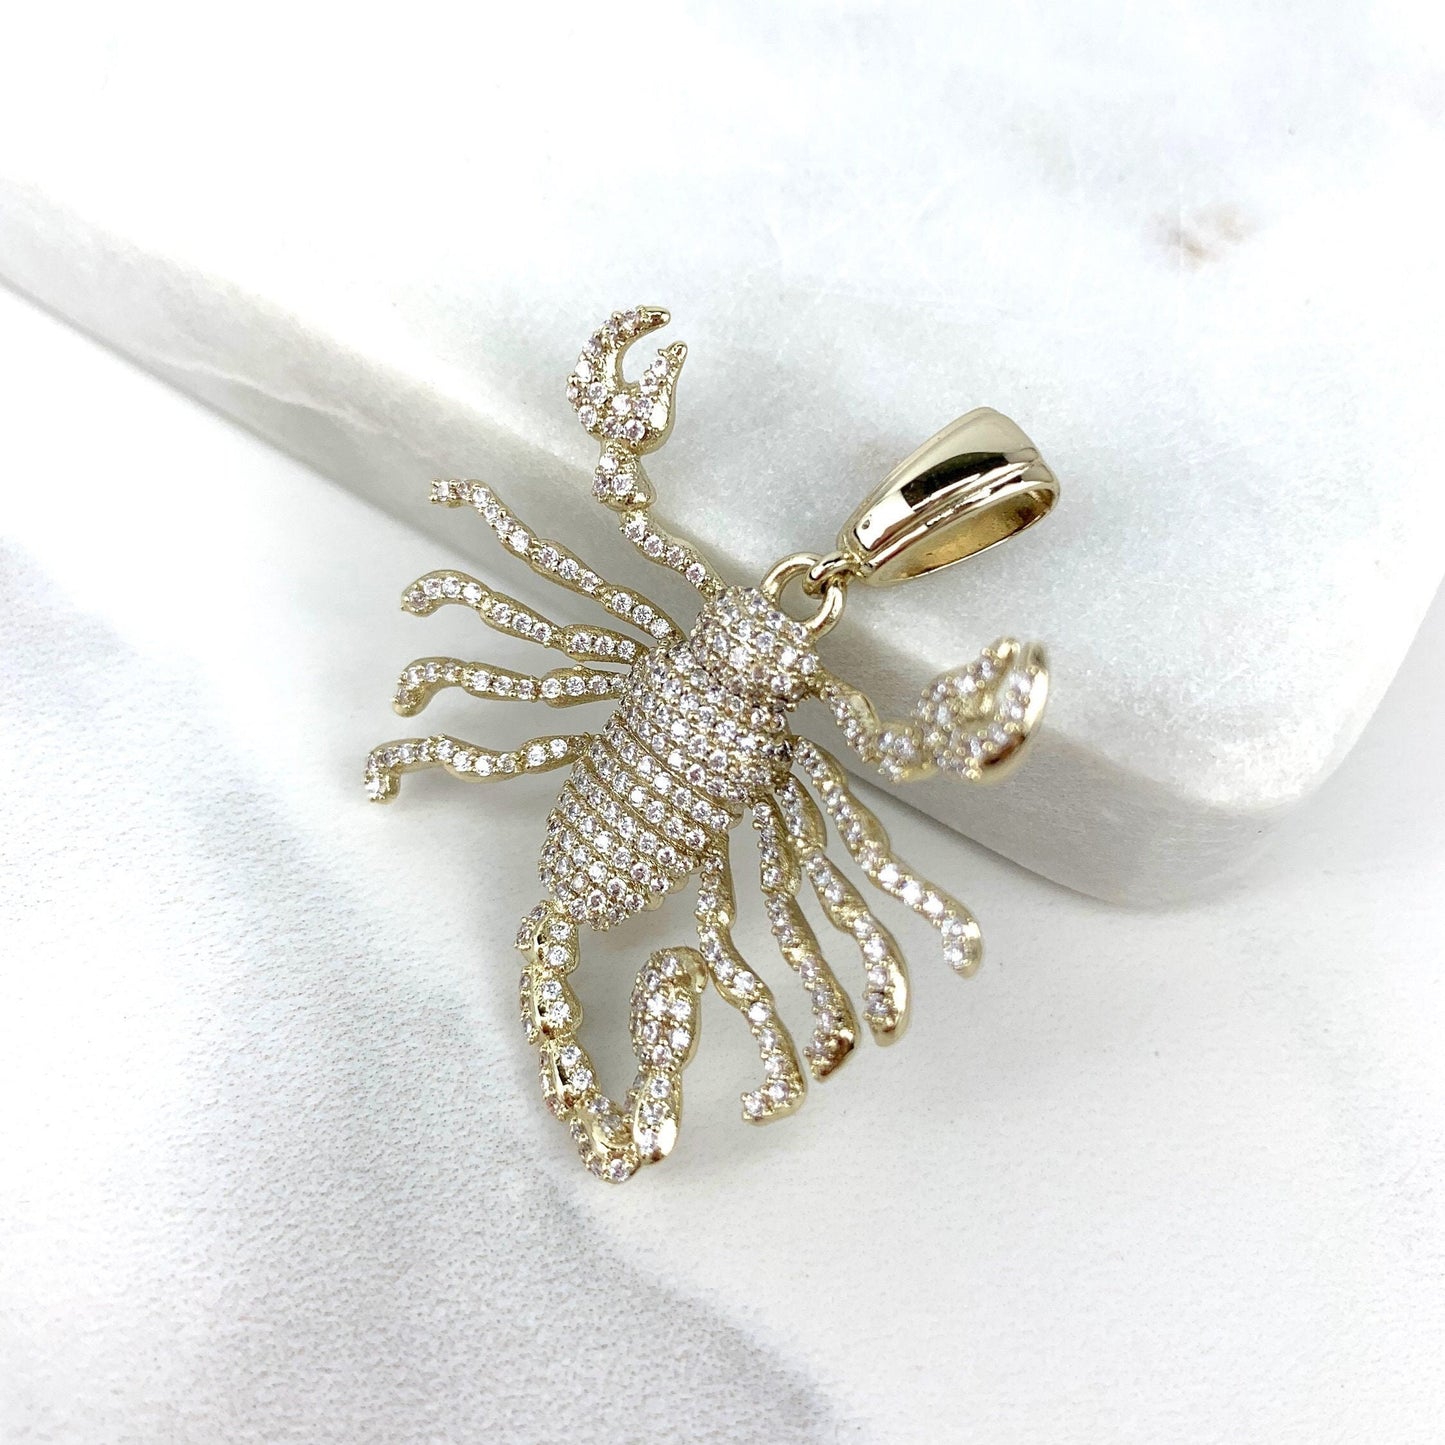 18k Gold Filled Micro Pave Cubic Zirconia Iced Scorpion Pendant Charms, Hip Hop, Men's Jewelry, Wholesale Jewelry Making Supplies